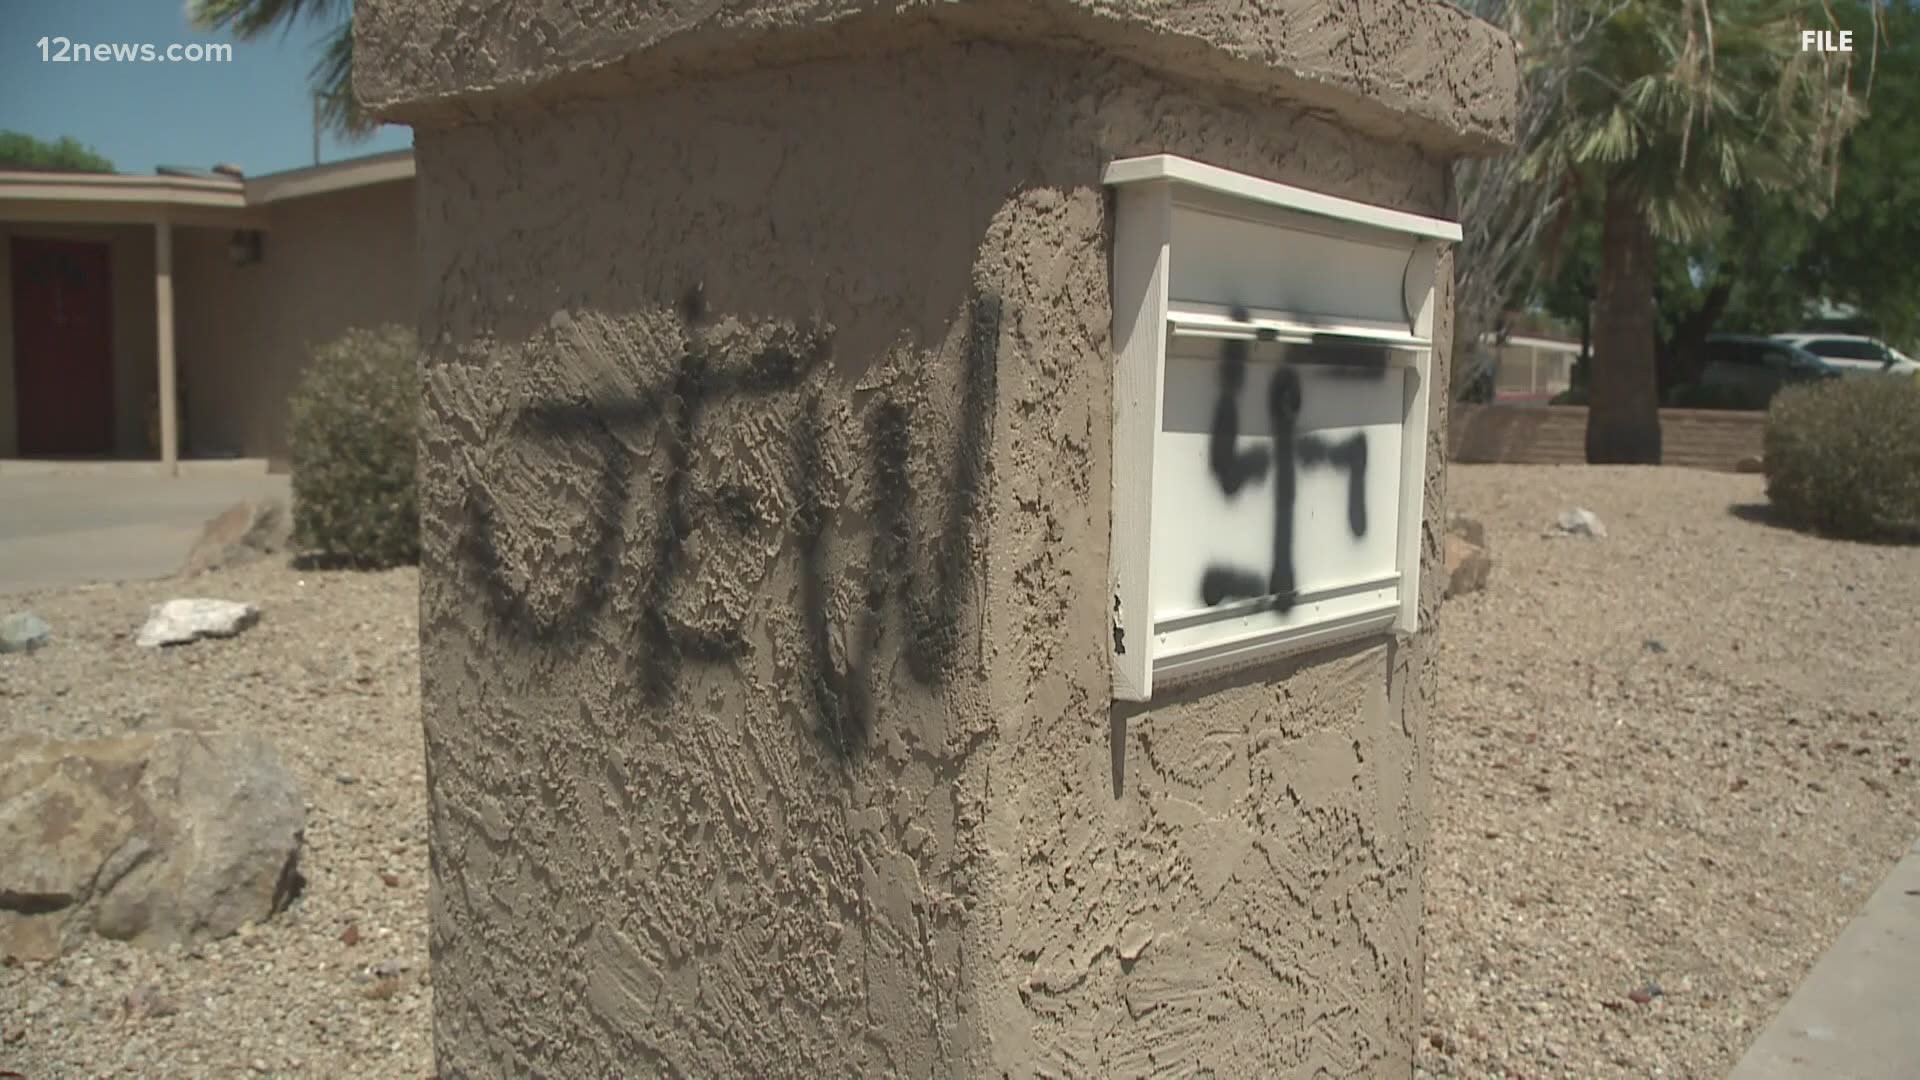 Hate crimes are the highest they've been in a decade in Arizona, according to the FBI. Local groups are working to push for laws to deal with hate crimes.